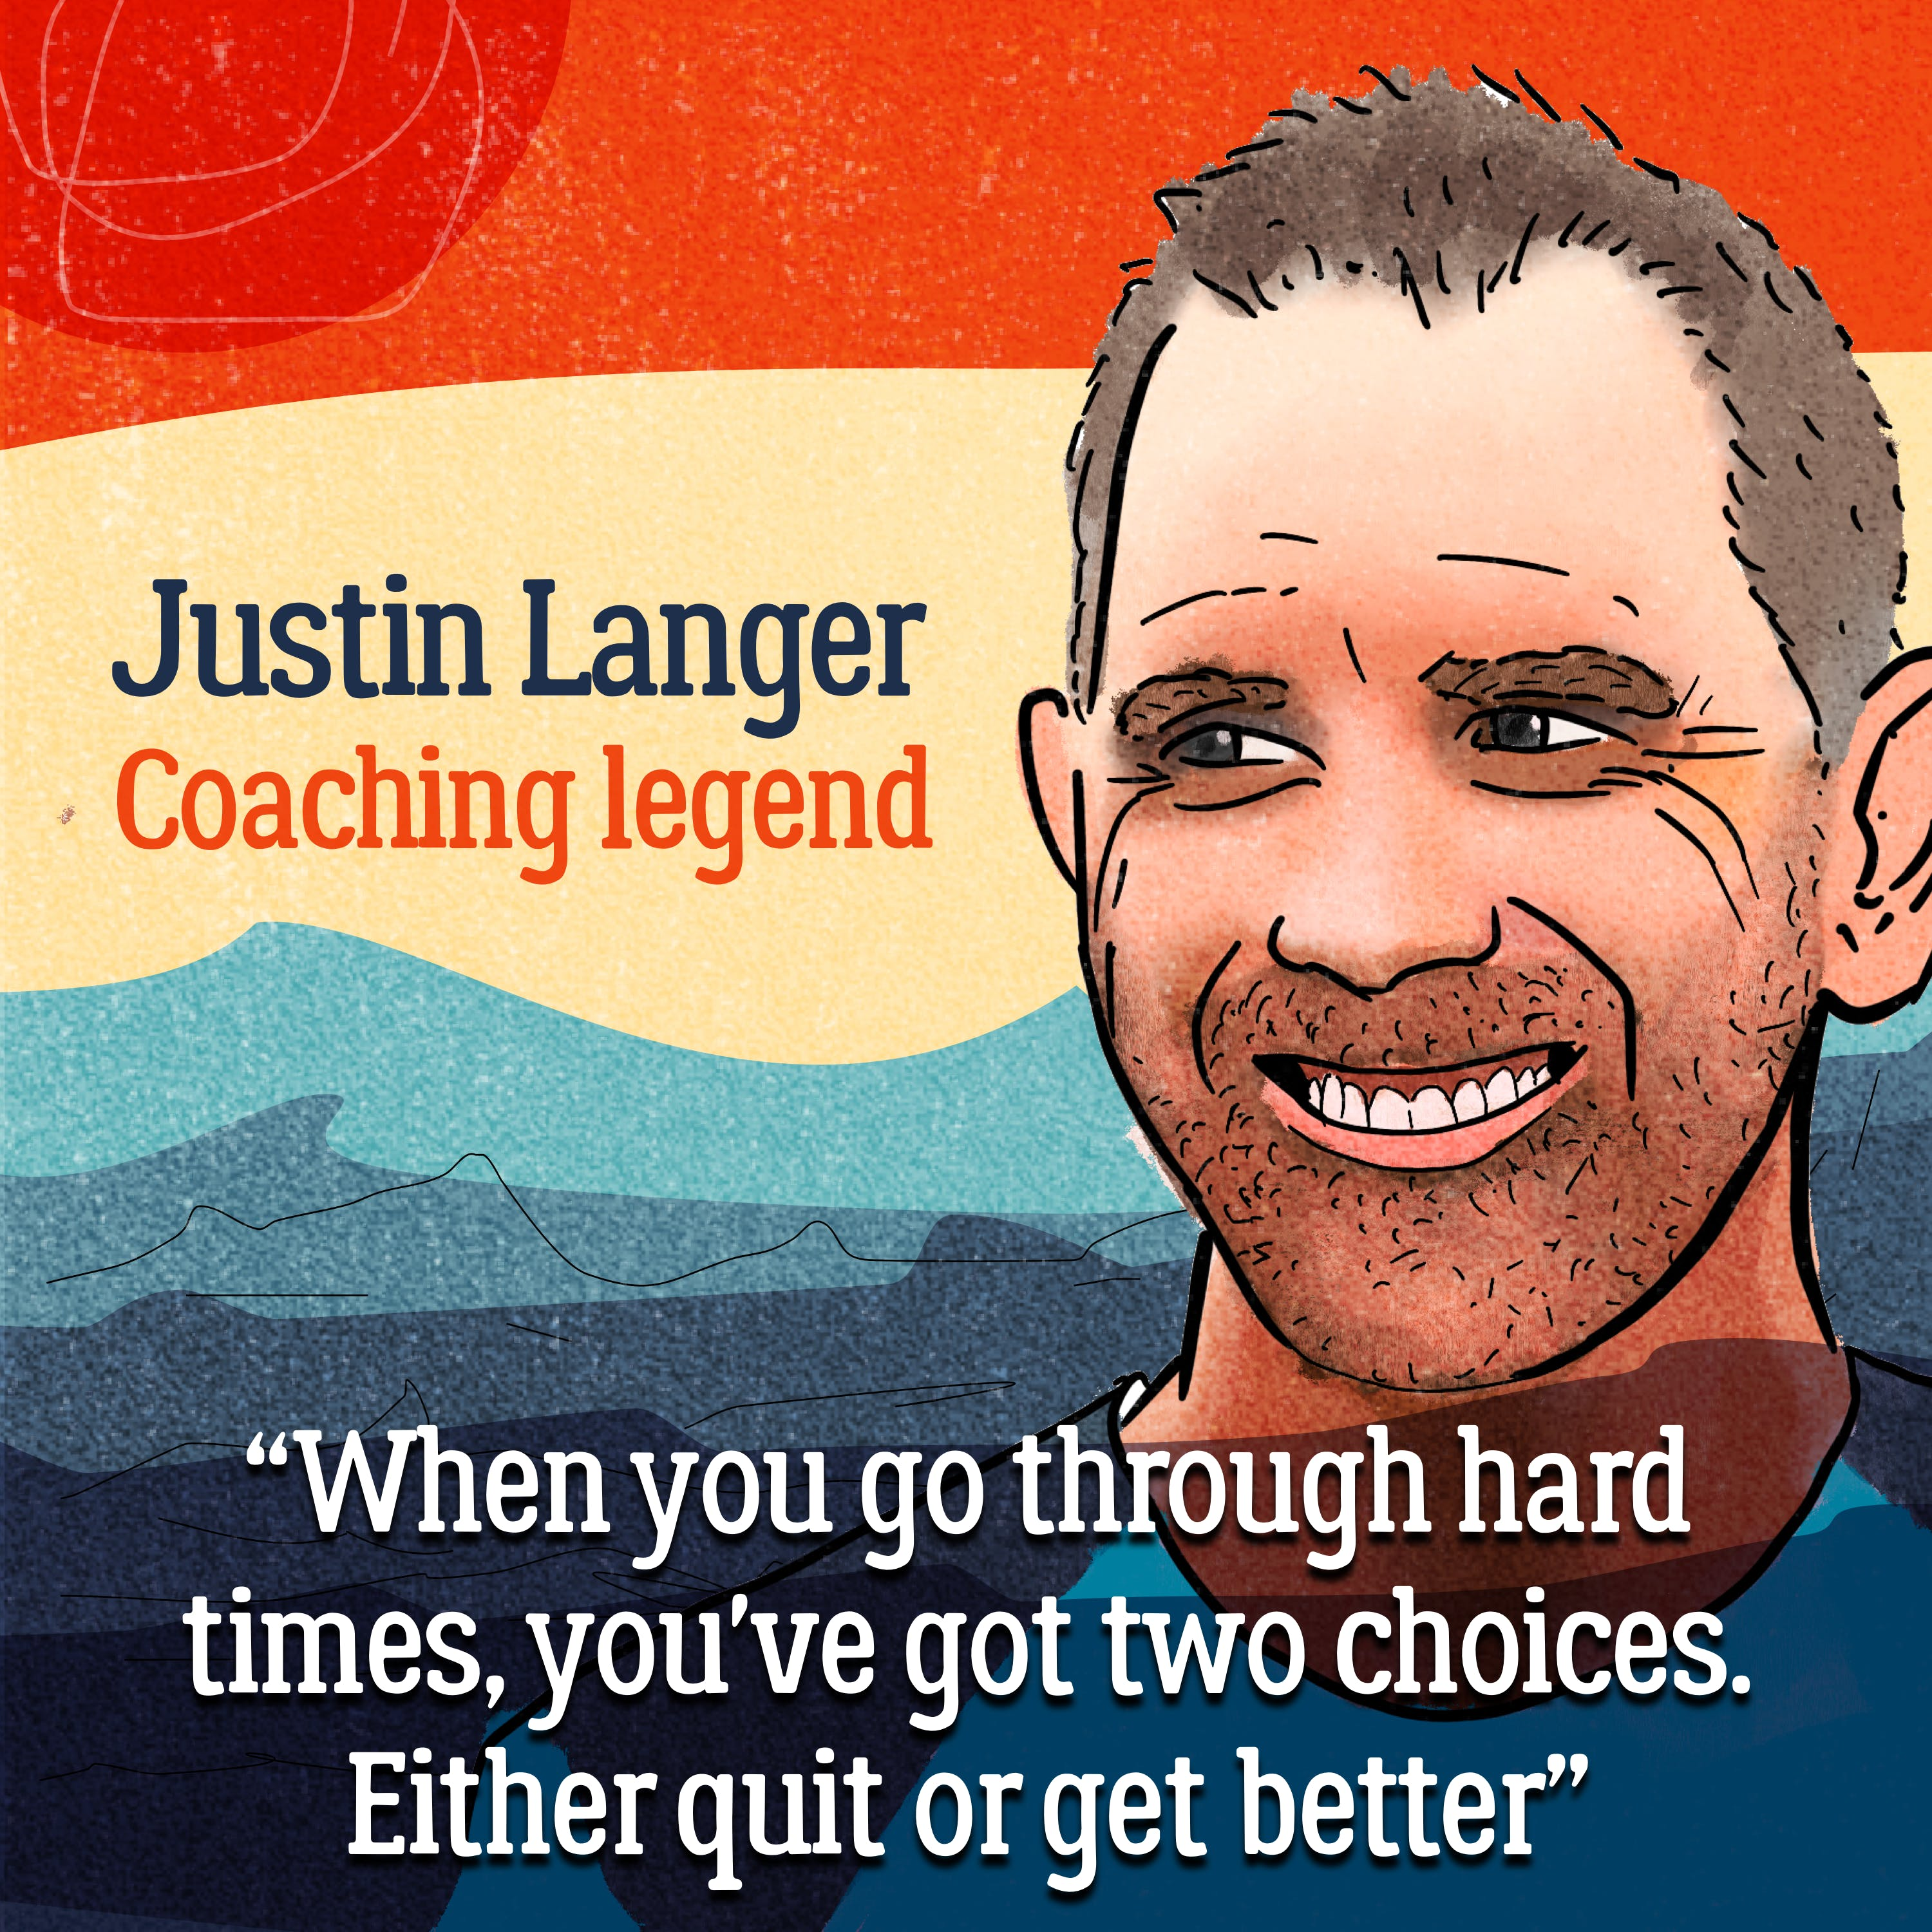 Testing times — Justin Langer on truth, tough love and making cricket great again